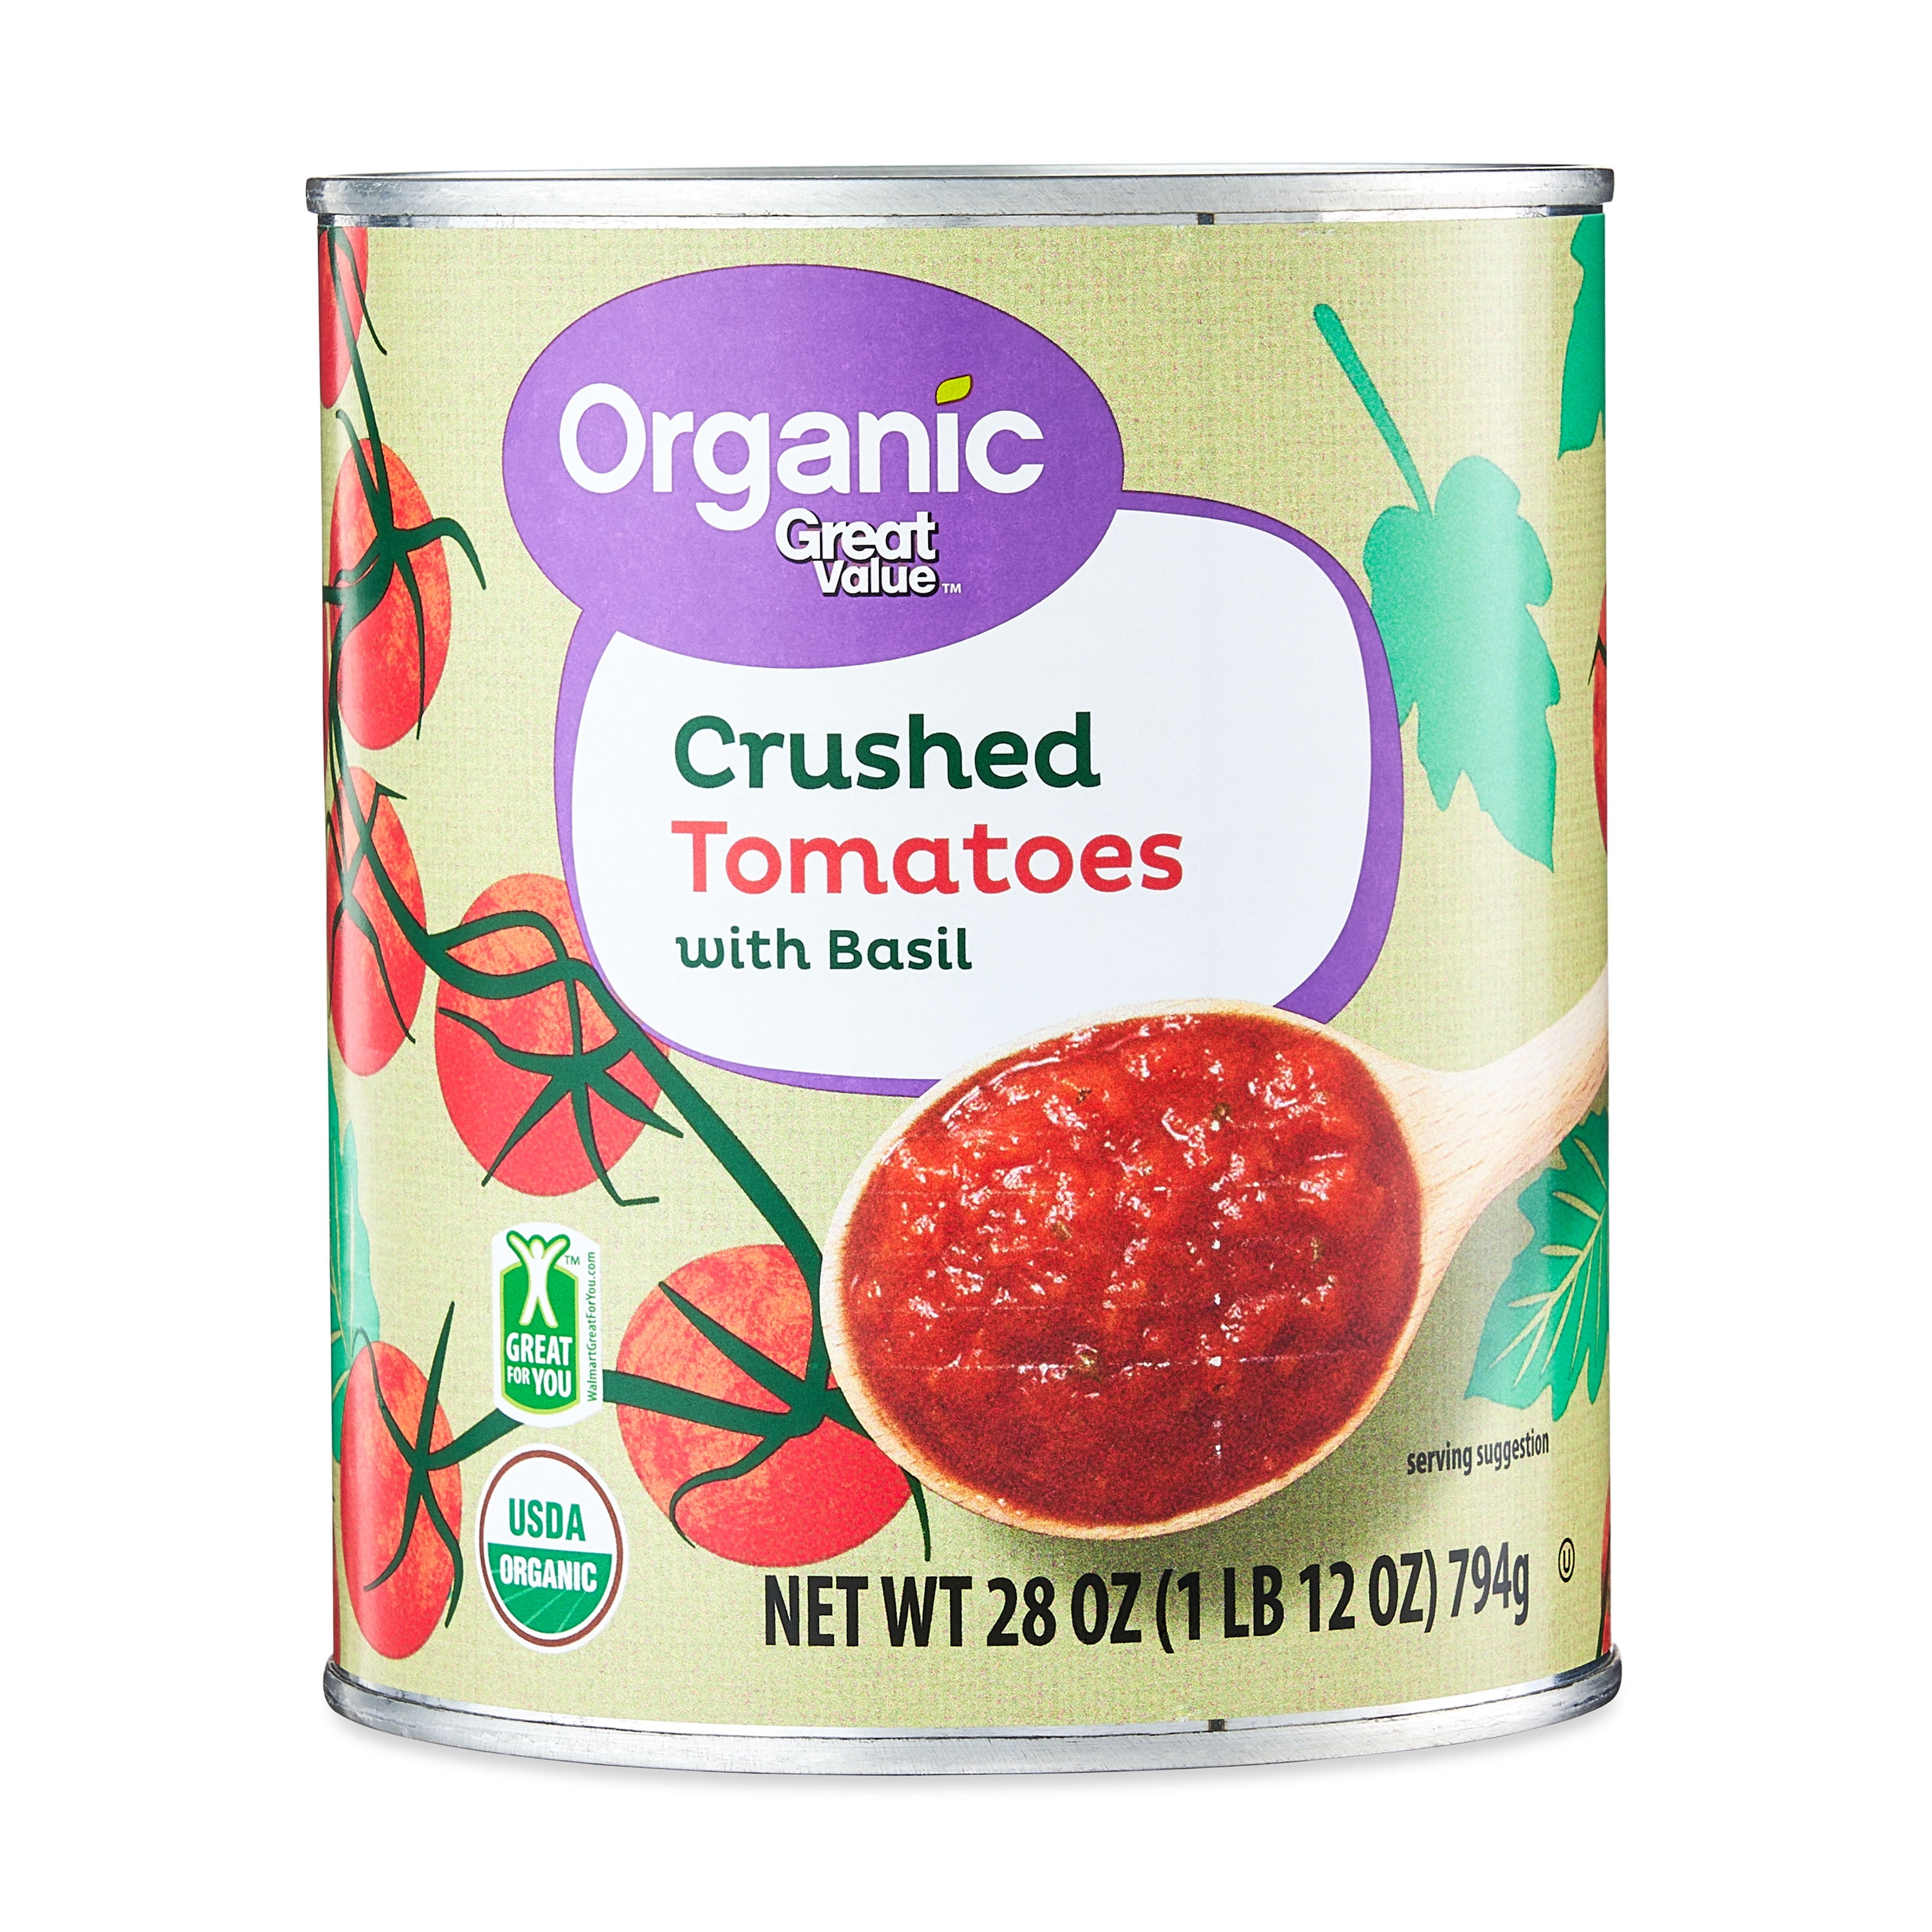 Great Value Organic Crushed Tomatoes with Basil, 28 oz